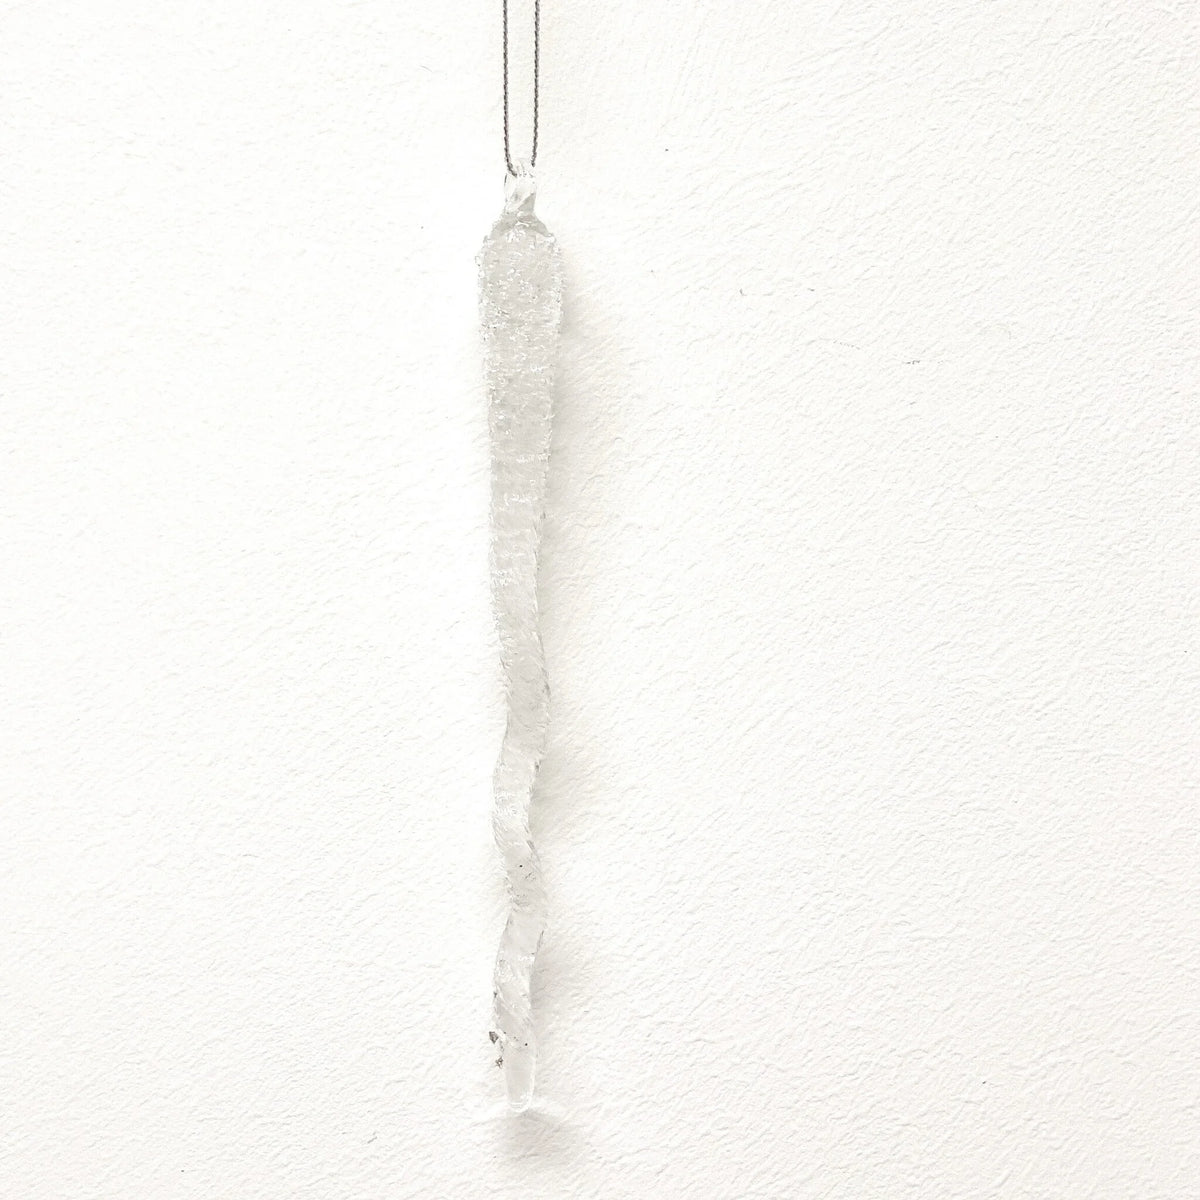 6.1' GLASS ICICLE  ORNAMENT